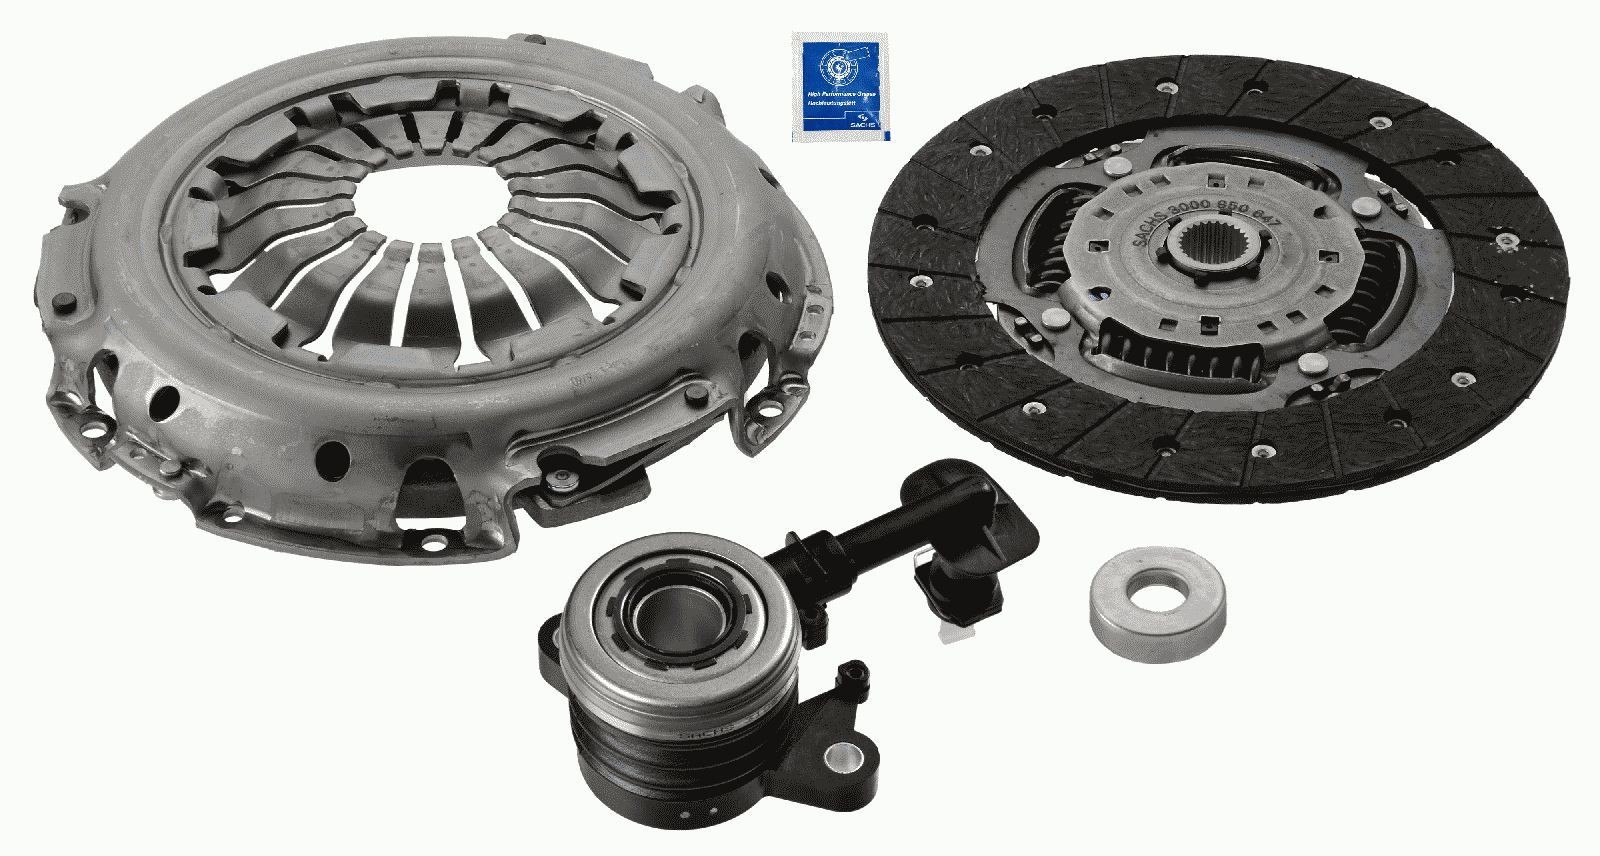 Original SACHS Clutch replacement kit 3000 990 551 for DACIA DOKKER